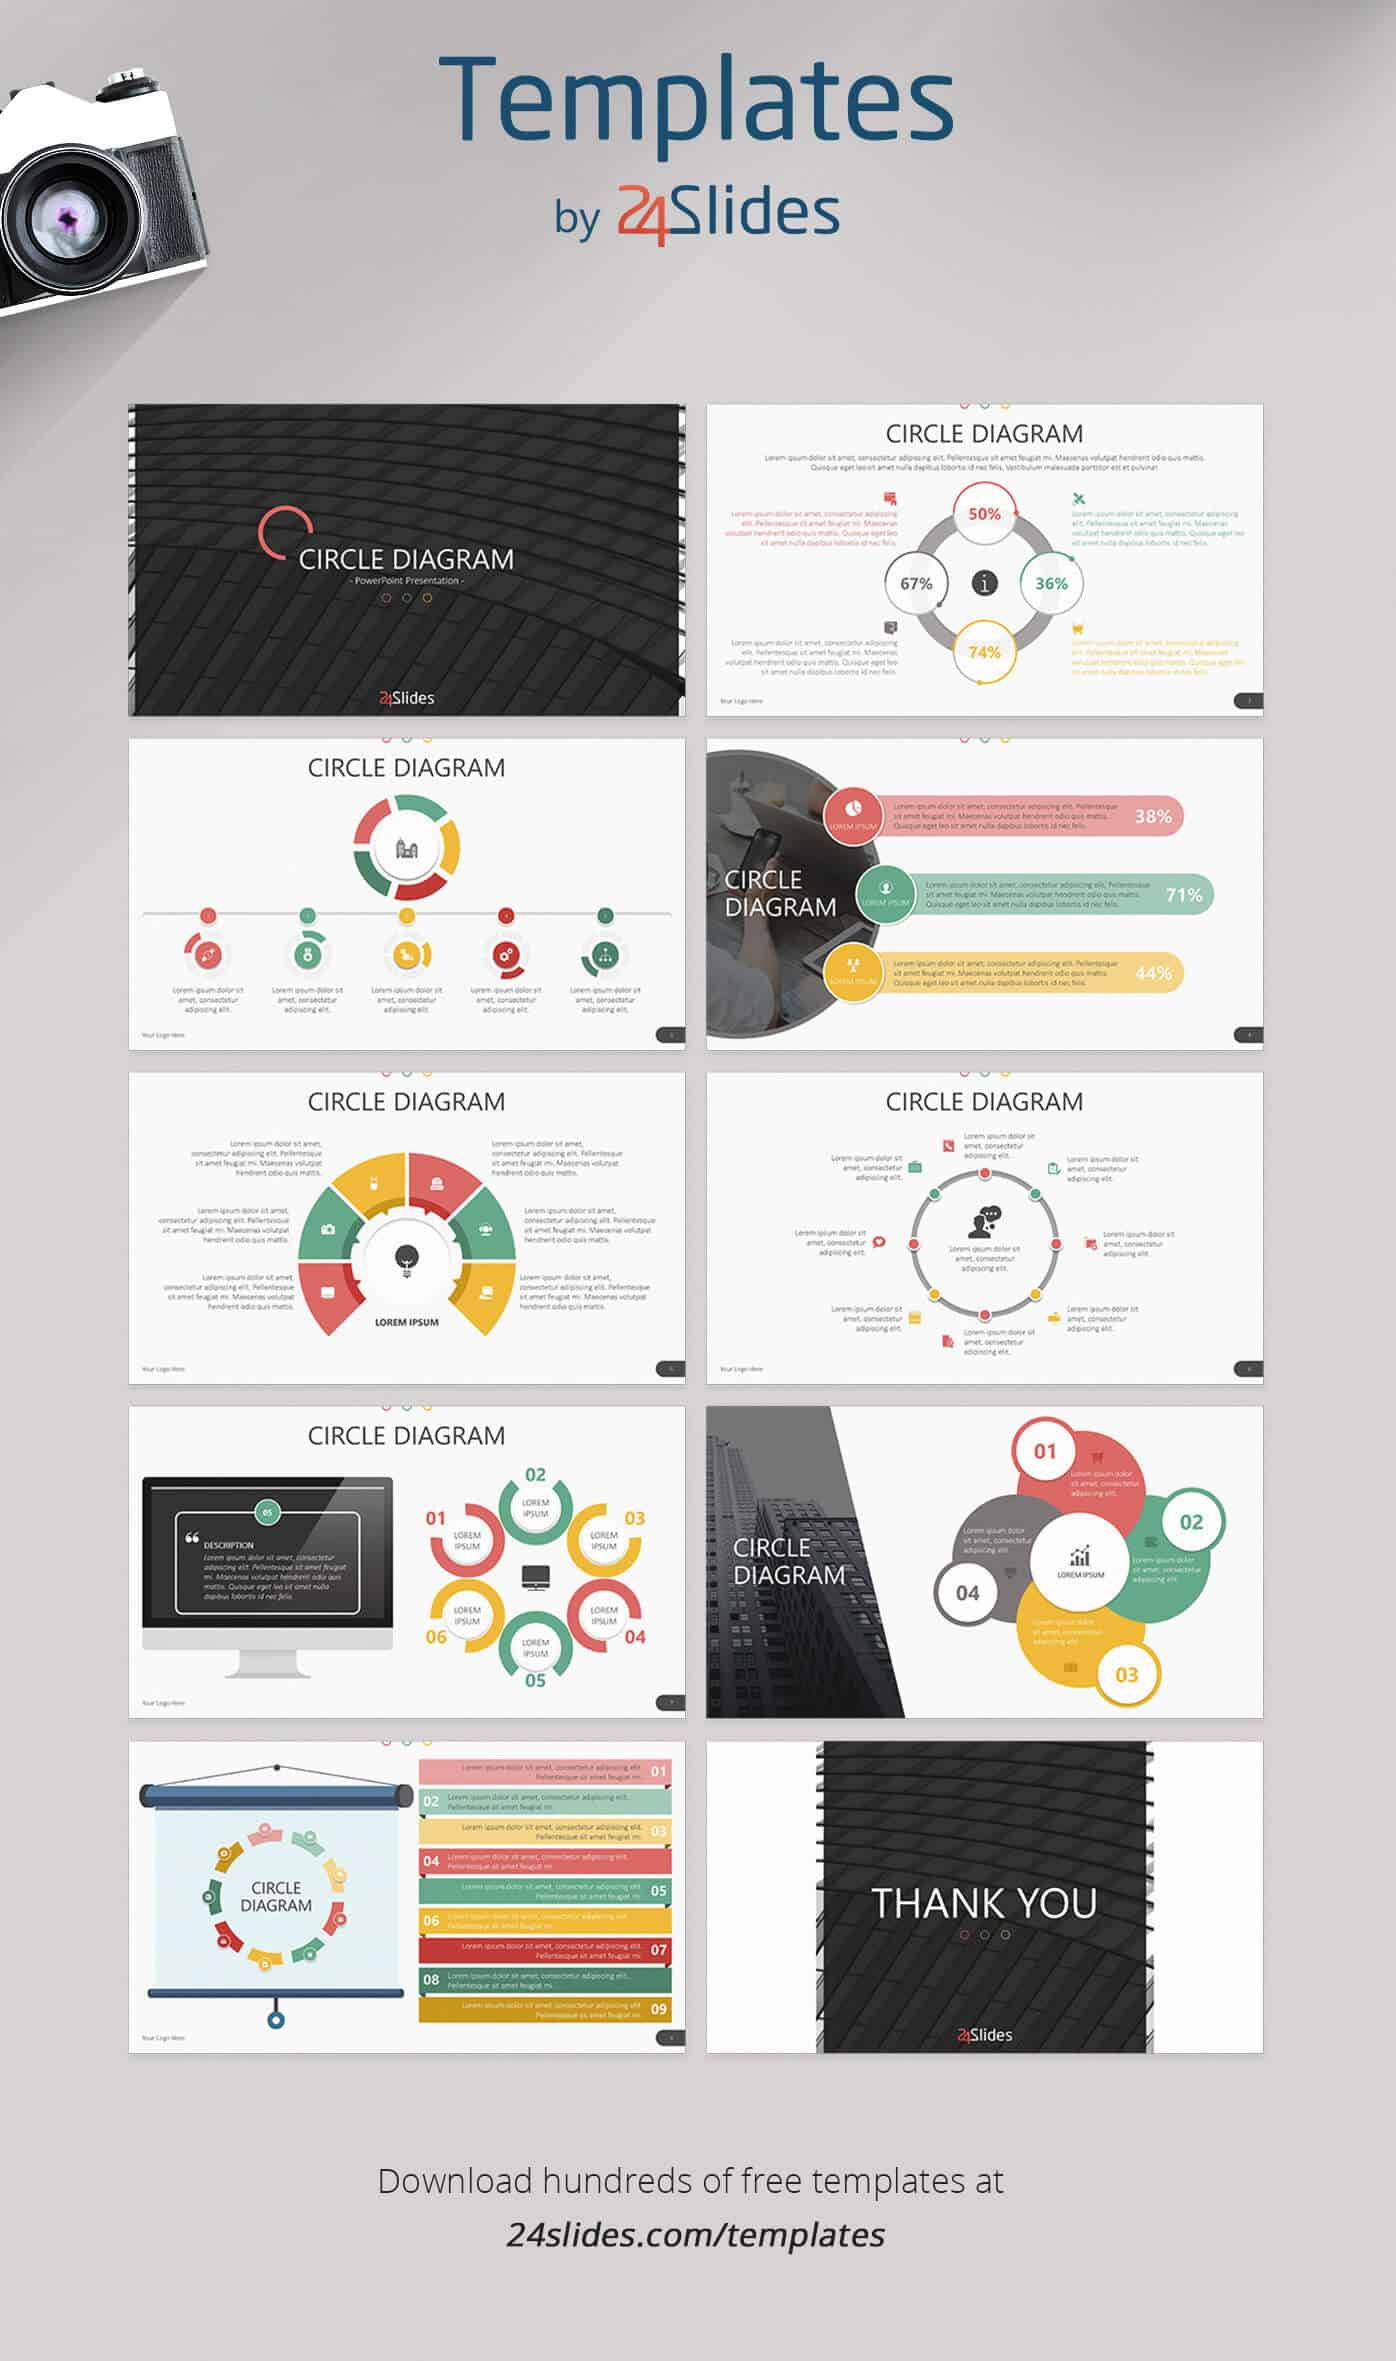 15 Fun And Colorful Free Powerpoint Templates | Present Better With Sample Templates For Powerpoint Presentation